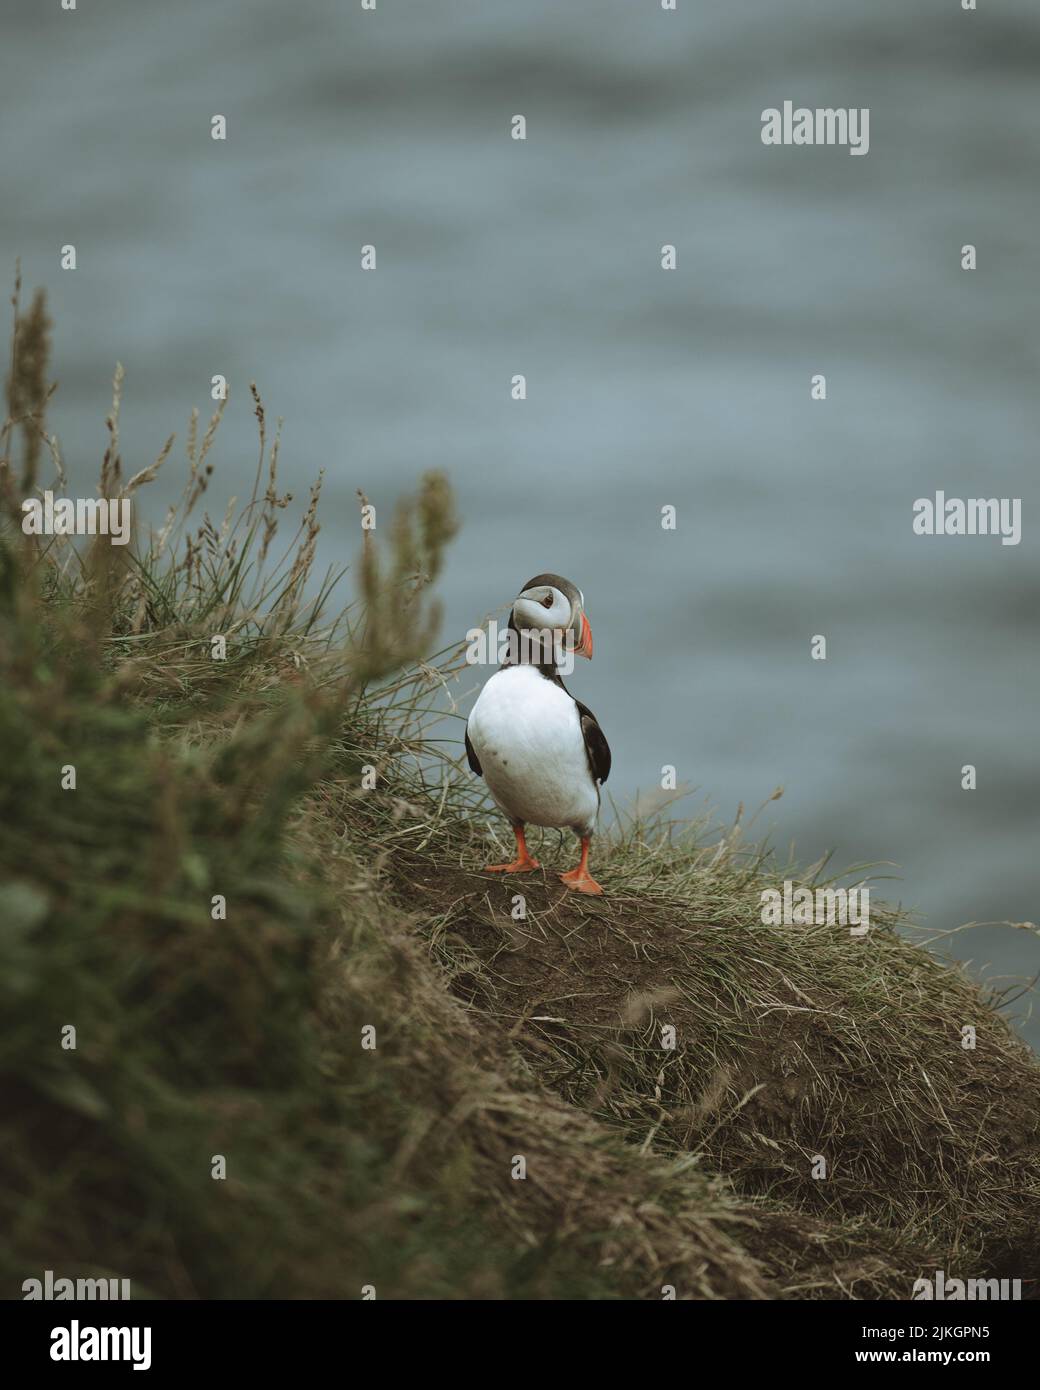 A vertical shot of an Atlantic puffin (Fratercula arctica) on a blurred background on Faroe islands Stock Photo